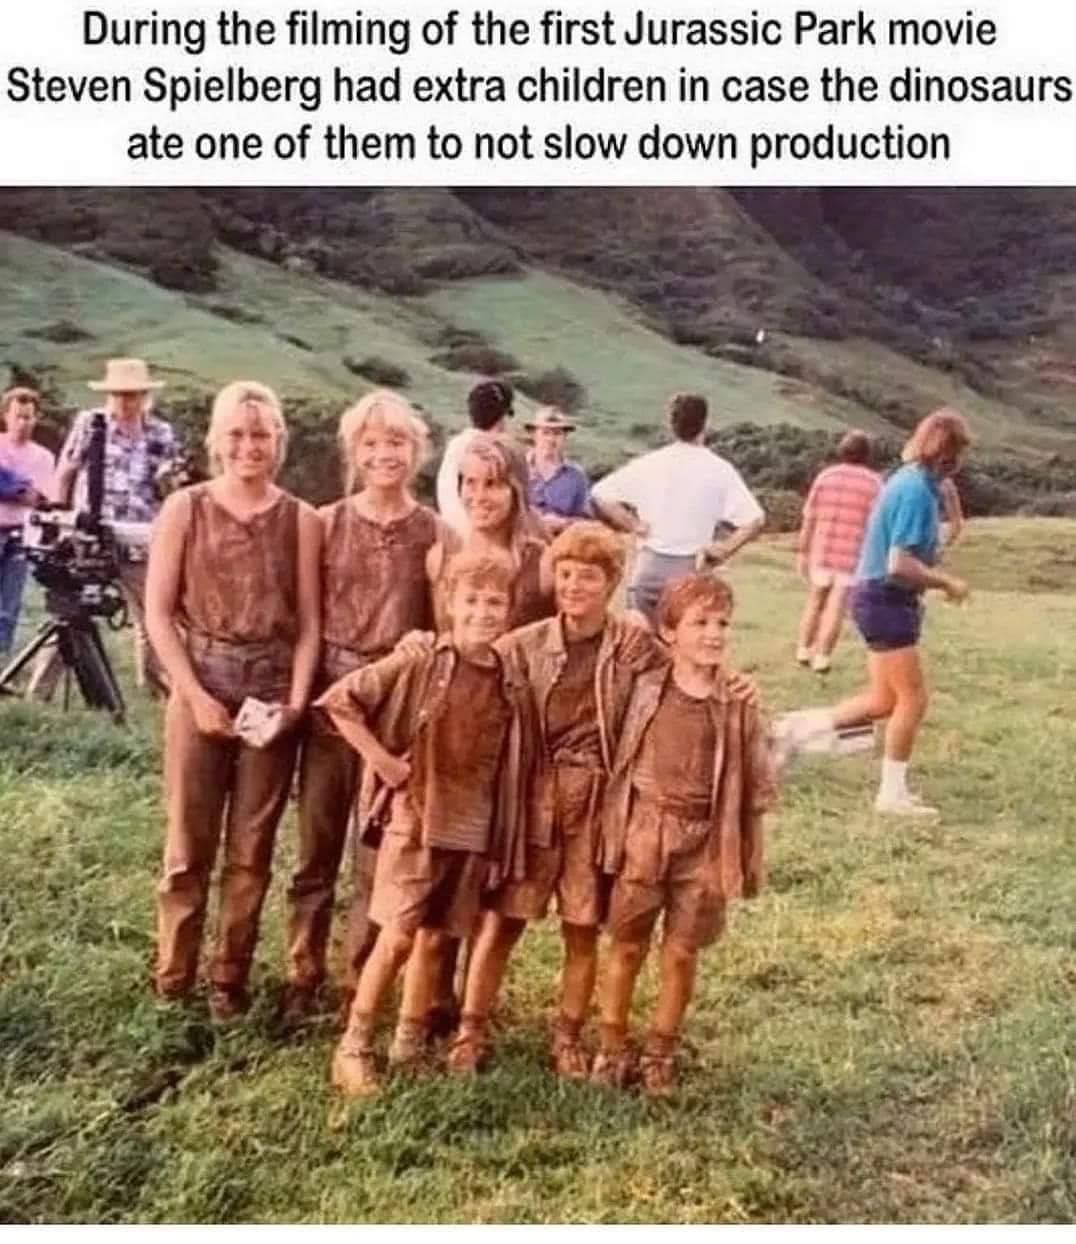 1993 On the Set of Jurassic Park, in case there were any accidents involving the child stars